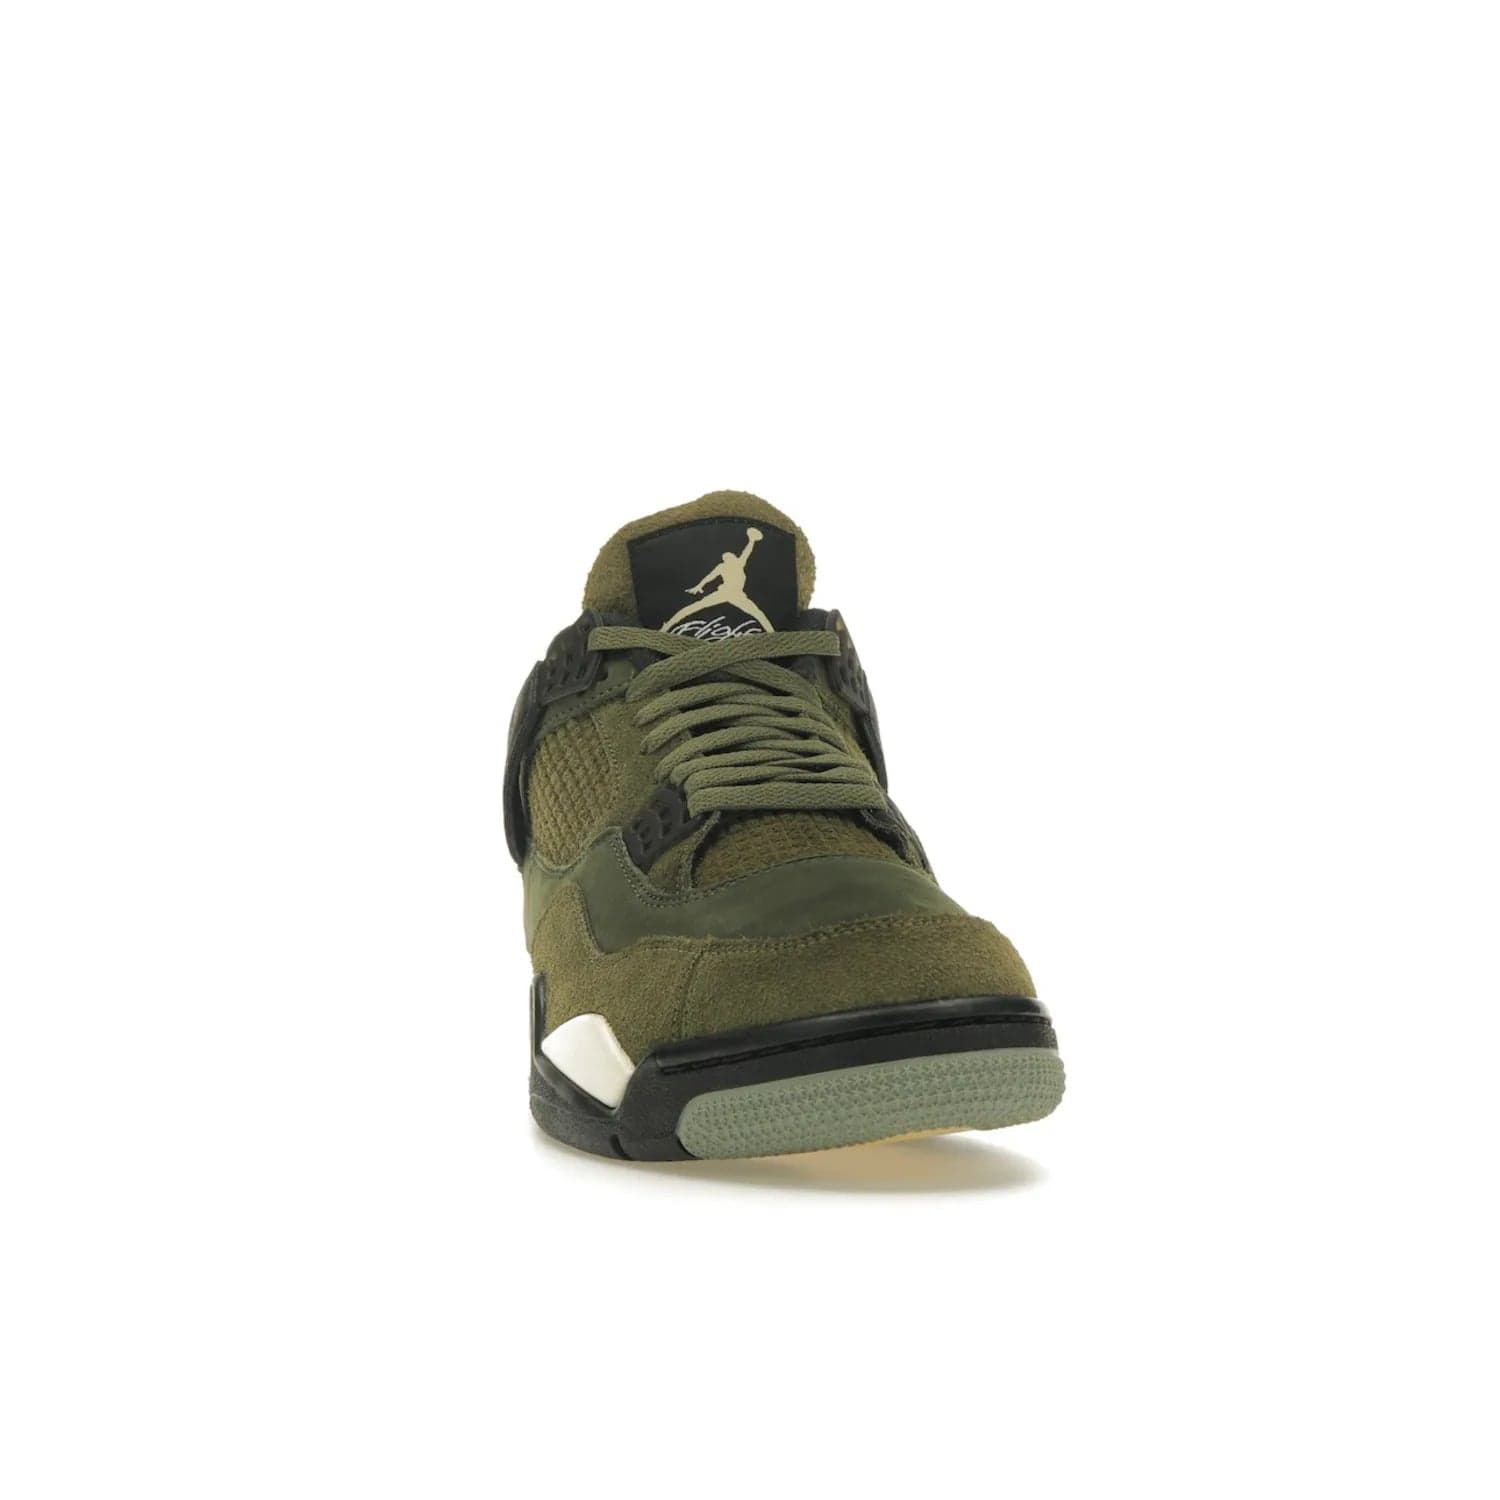 Jordan 4 Retro SE Craft Medium Olive - Image 9 - Only at www.BallersClubKickz.com - Grab the Jordan 4 Retro SE Crafts for a unique style. Combines Medium Olive, Pale Vanilla, Khaki, Black and Sail, with same classic shape, cushioning, and rubber outsole. Available on November 18th!